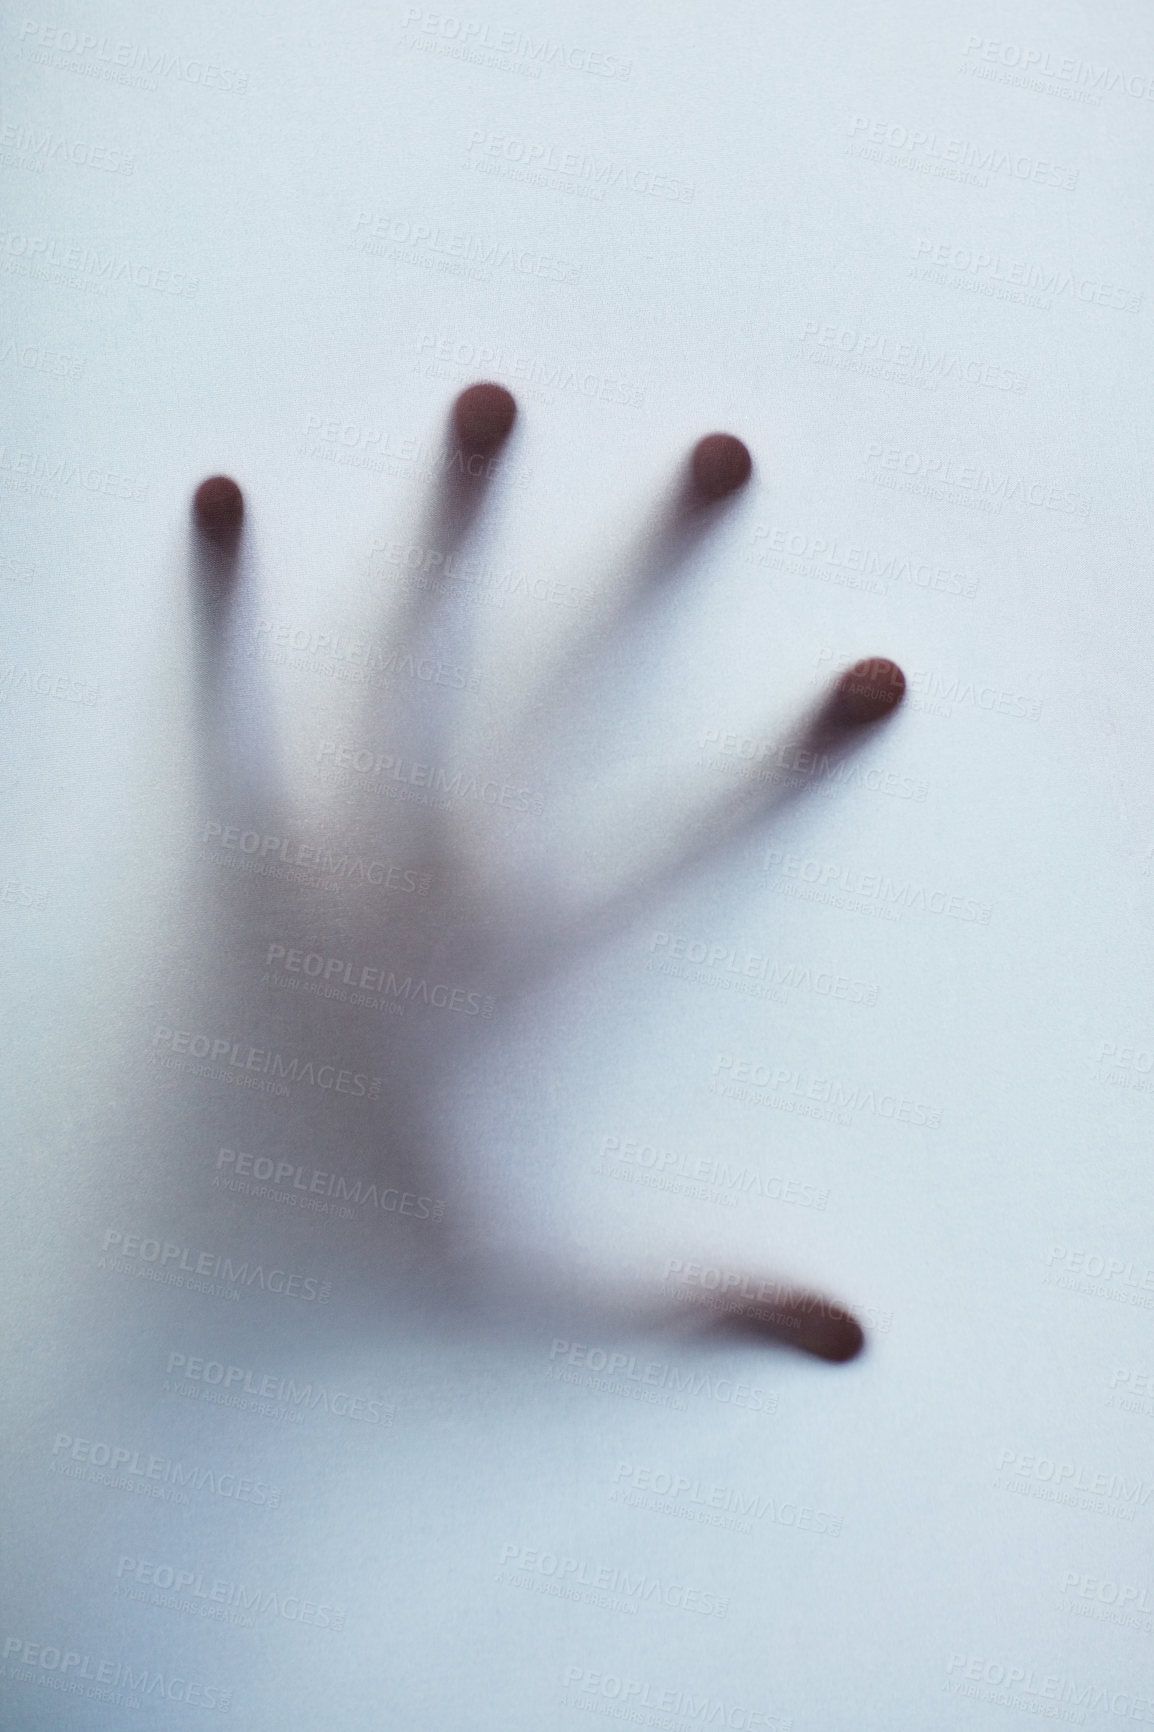 Buy stock photo Defocussed shot of a single hand reaching out against a plain background